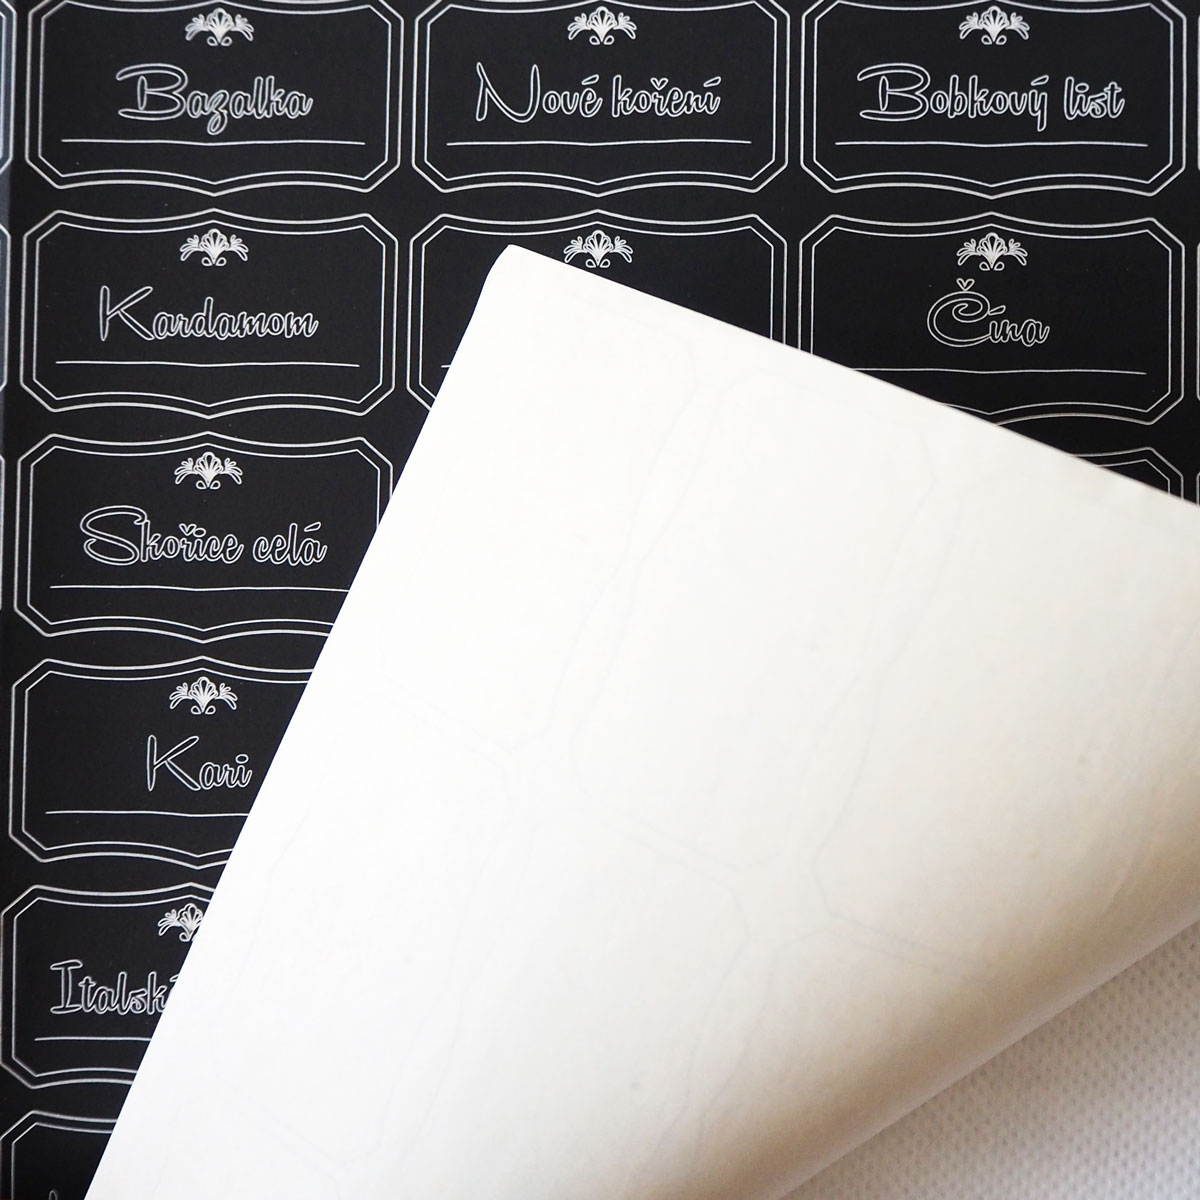 Self-adhesive black paper for laser printers and copiers - 100 sheets